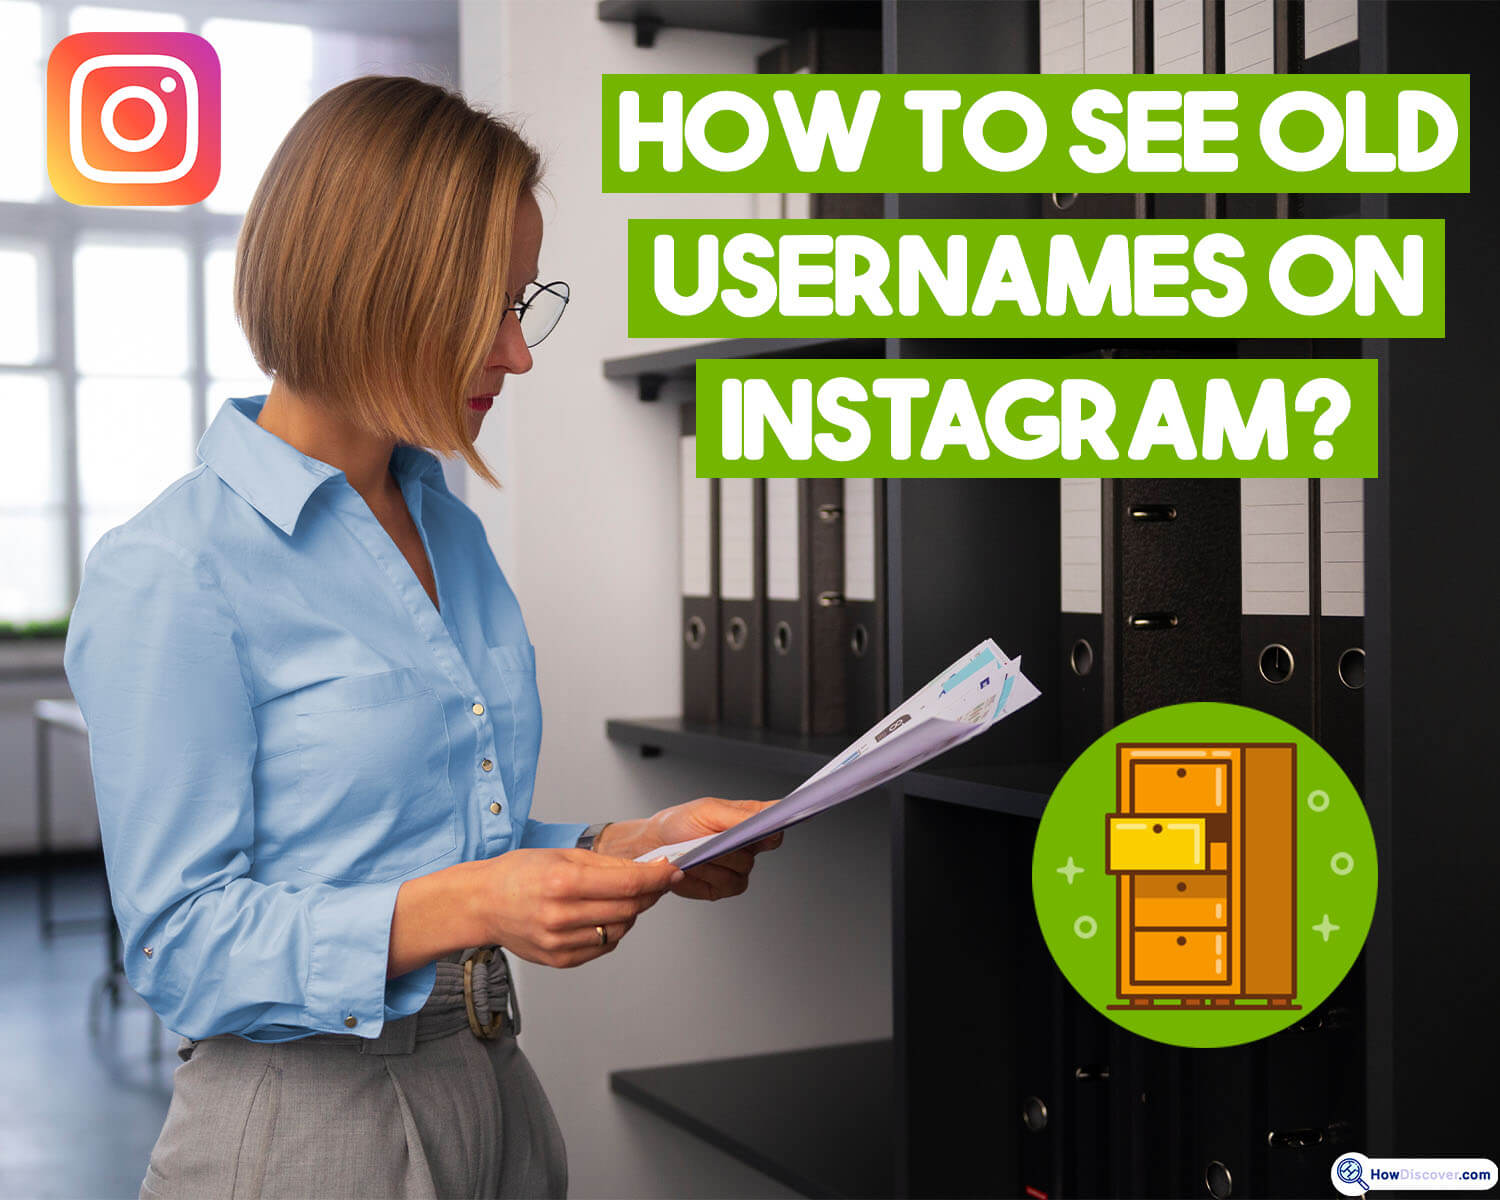 How To See Old Usernames On Instagram